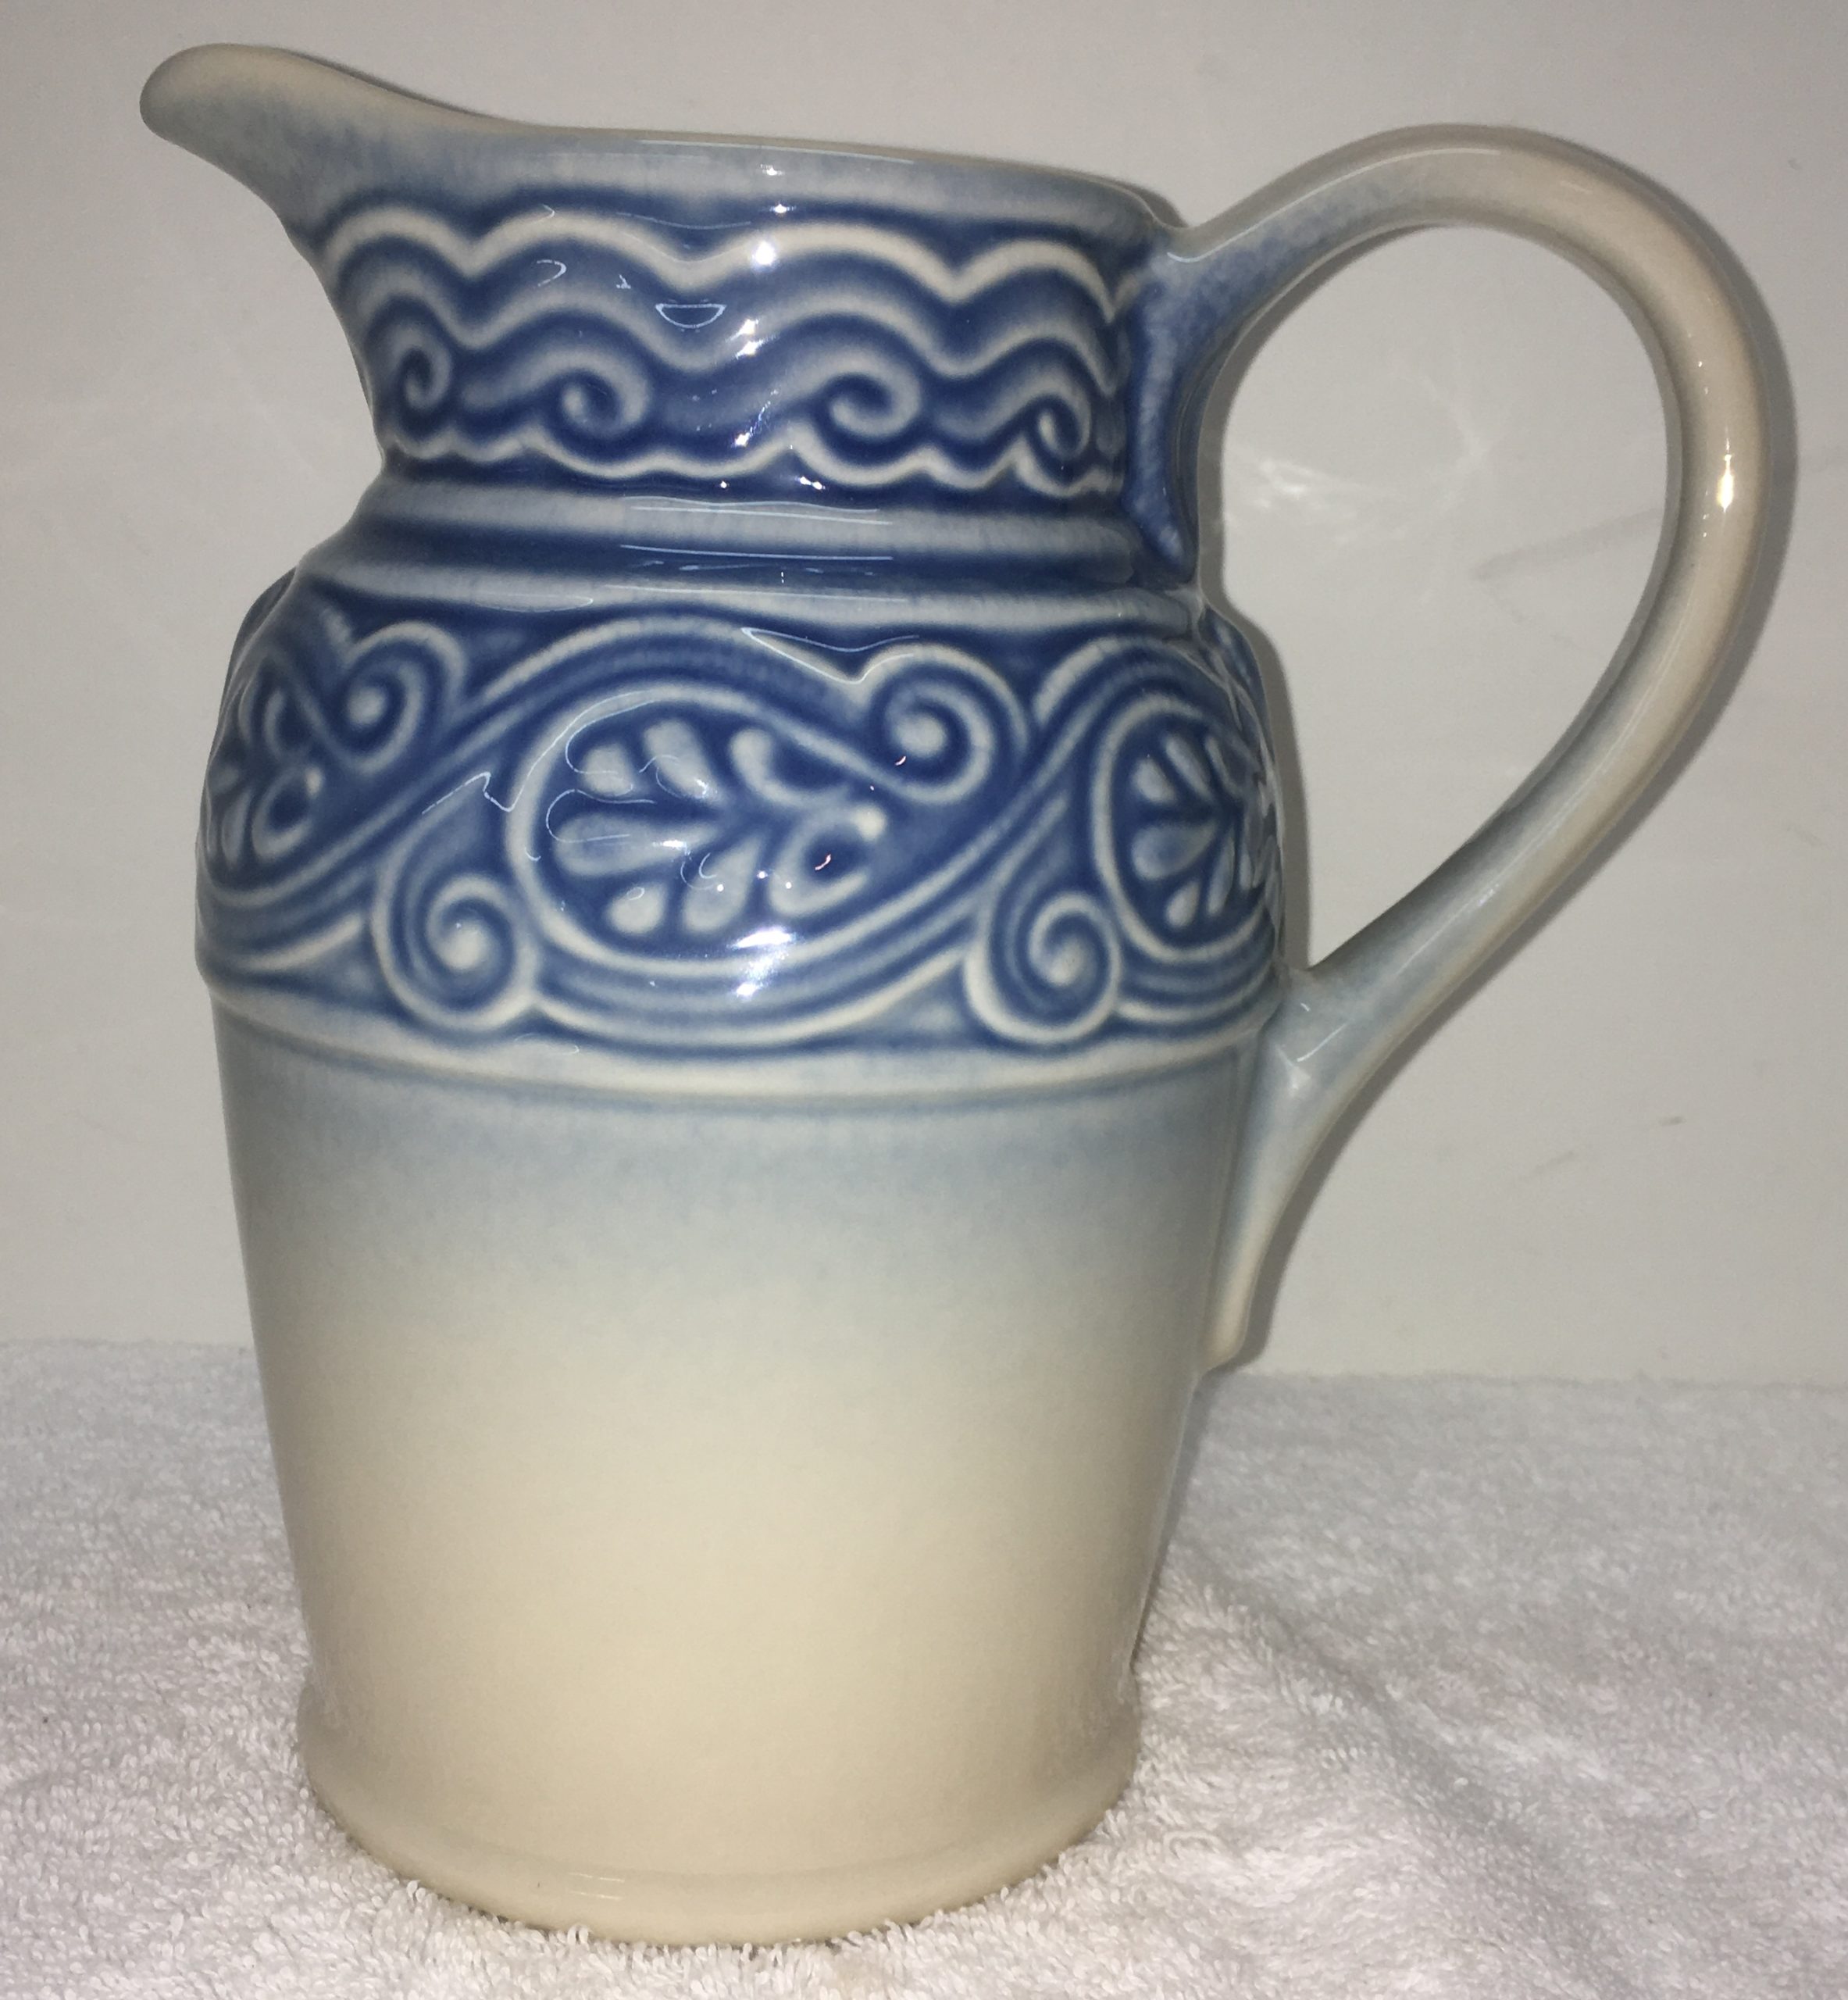 Longaberger Pottery Pitcher (Blue) and Blue Jar with Boyds Bear Topper -  Northern Kentucky Auction, LLC